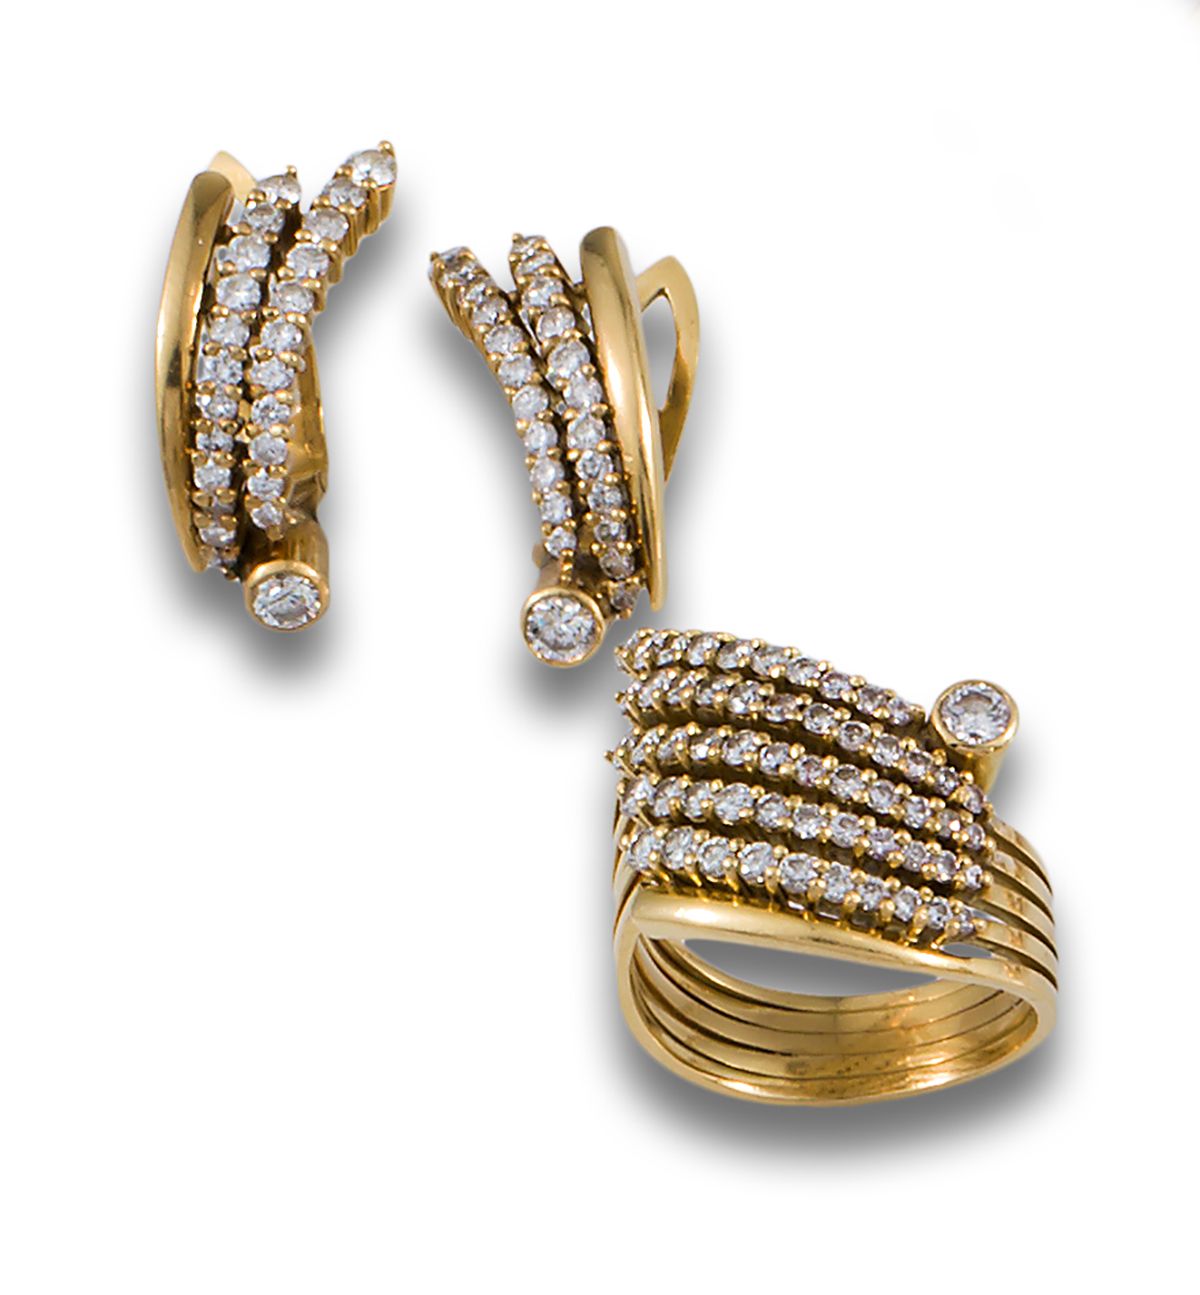 SET GOLD RING AND EARRINGS DIAMOND BANDS Set comprising 18kt yellow gold ring an&hellip;